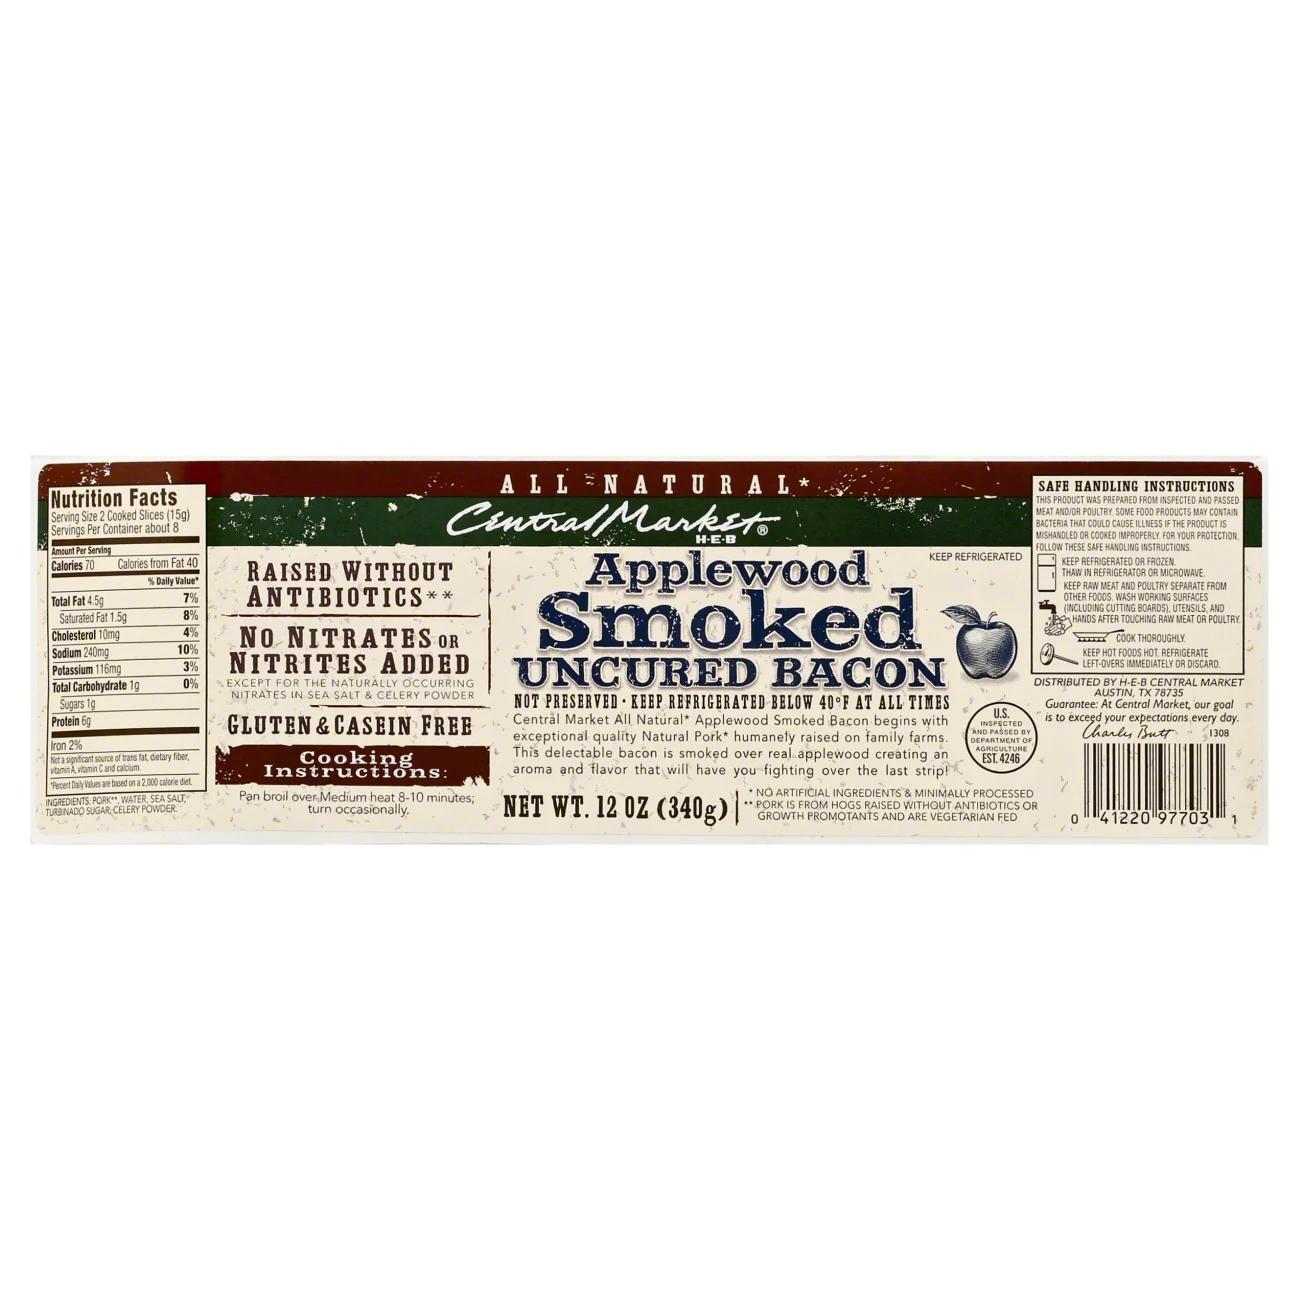 applewood smoked bacon nutrition - What is the nutritional value of applewood smoked bacon